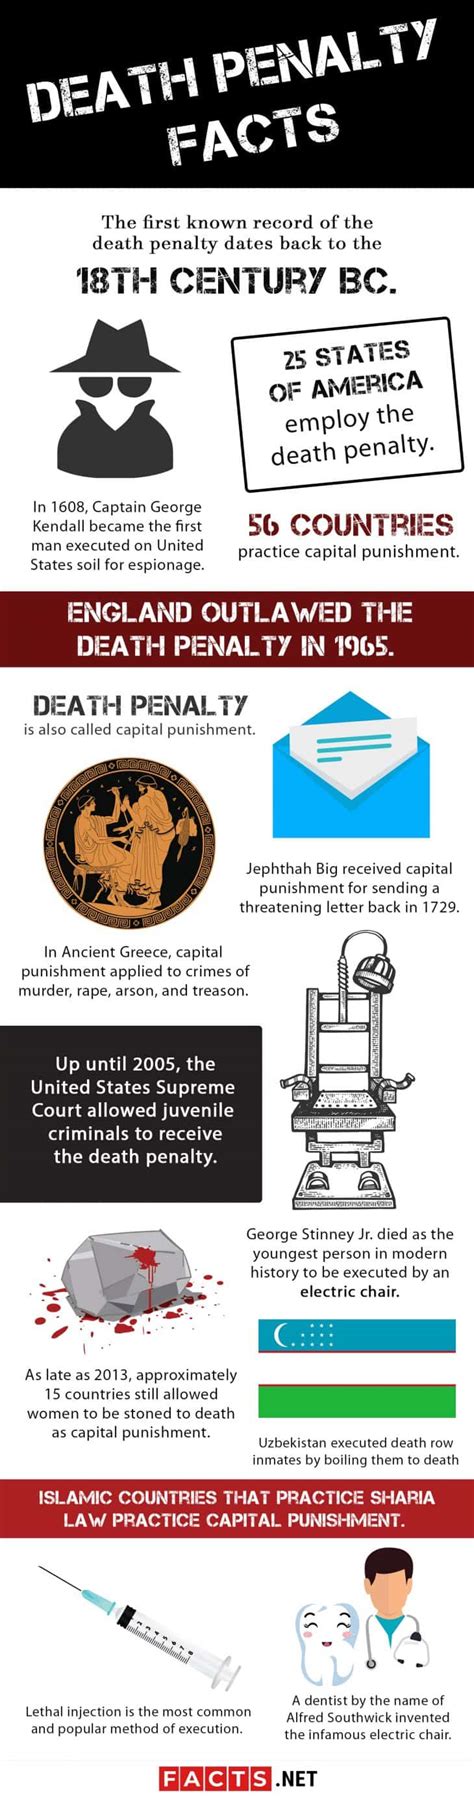 death penalty facts    spine chilling factsnet